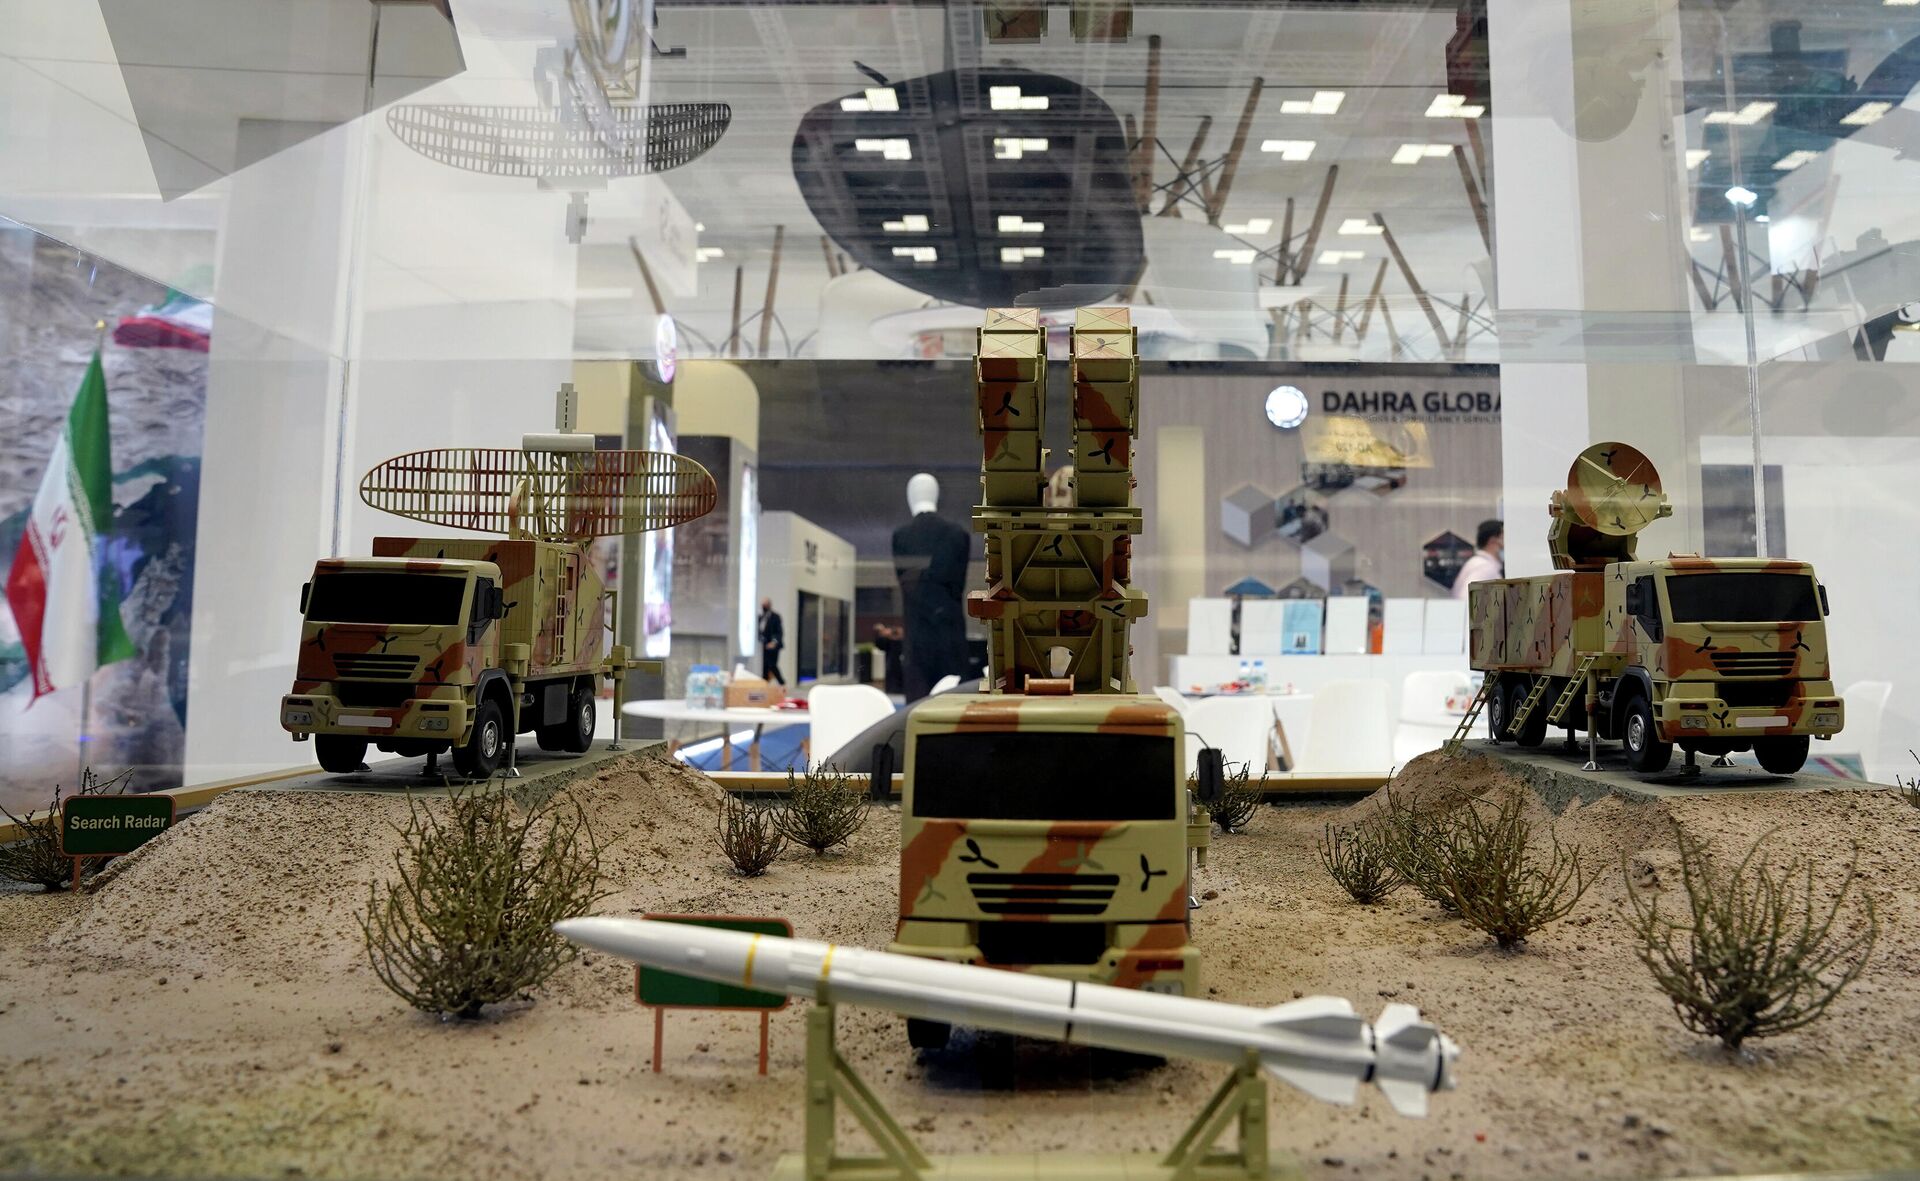 A model of an Iranian Bavar-373 (AD-200) launch system missile is seen at a stand at the DIMDEX exhibition in Doha, Qatar, Wednesday, March 23, 2022. Iran, under sweeping economic sanctions, was hawking weapons on Wednesday at a Qatari defense exhibit, a surprising sight at the major conference also showcasing American companies and fighter jets. - Sputnik International, 1920, 23.03.2022